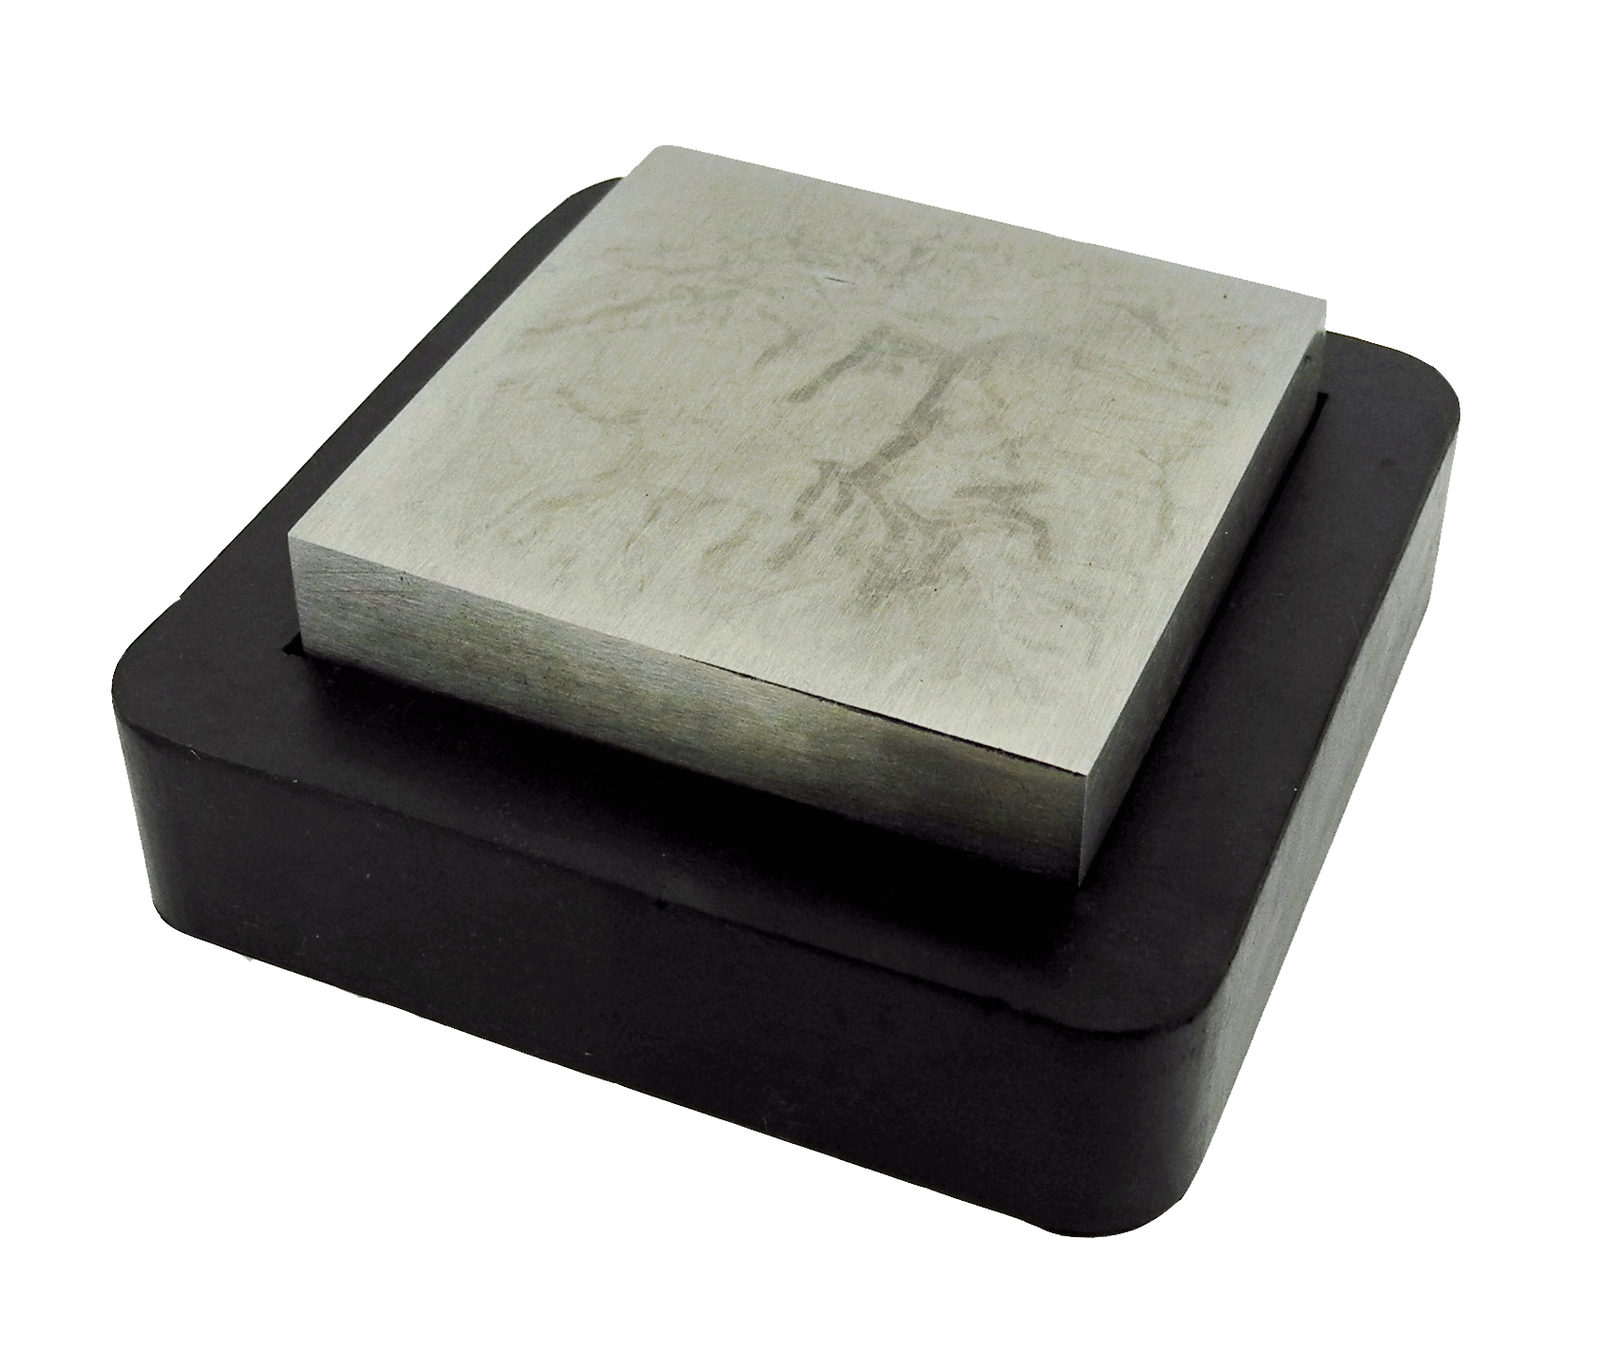 Bench Block 2.7X2.7 Steel with rubber base - SJ Jewelry Supply